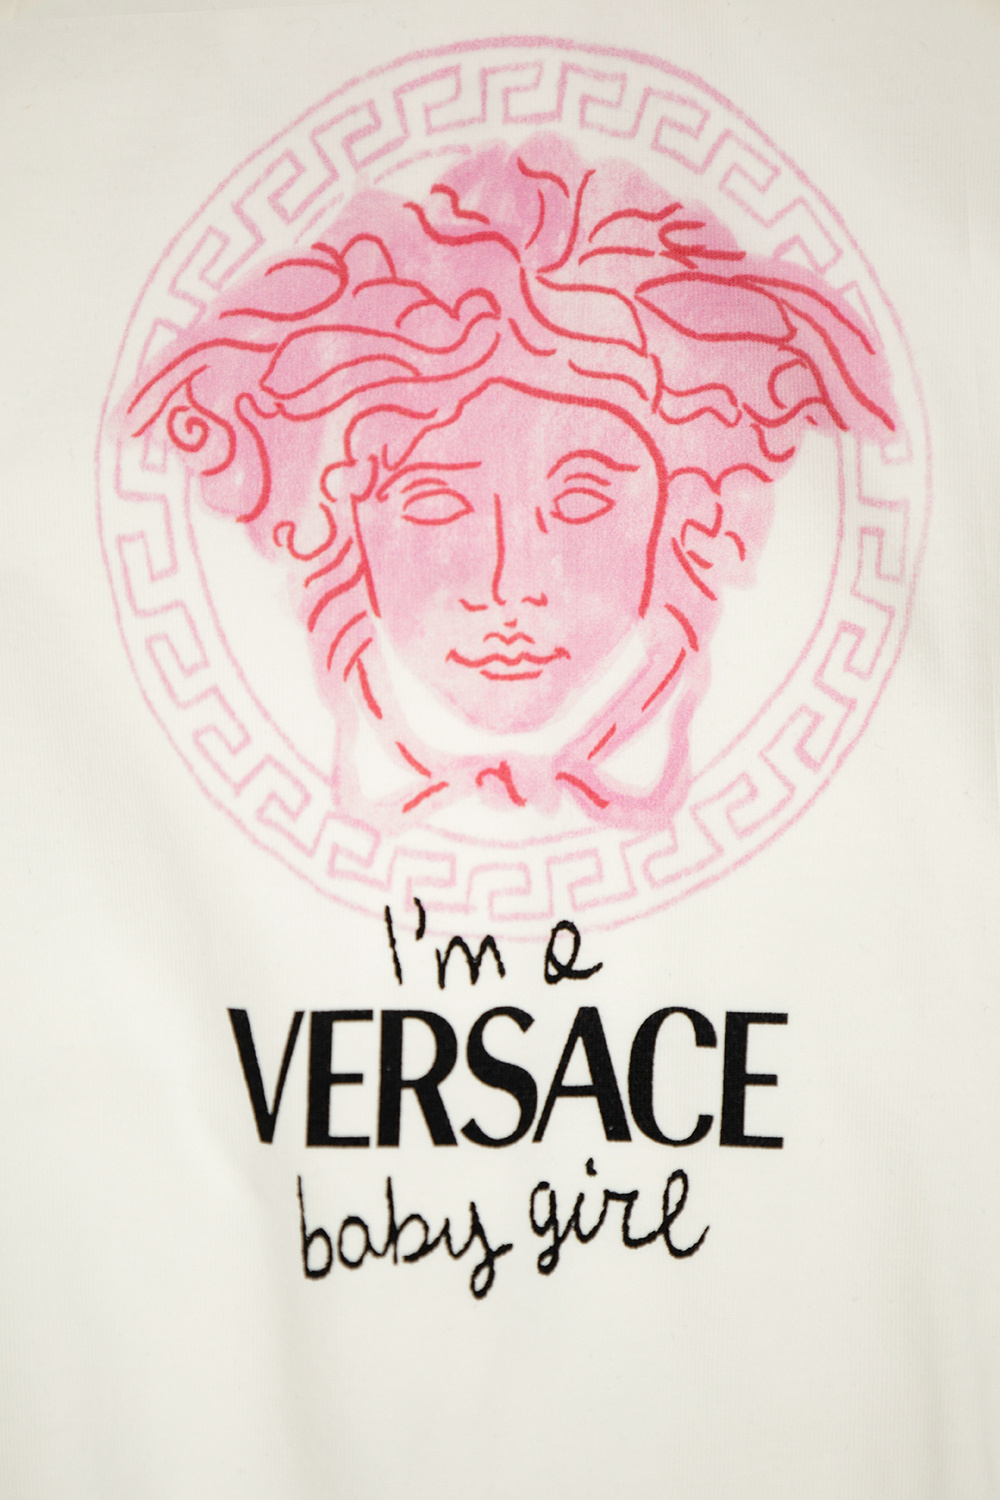 Versace Kids Download the latest version of the app